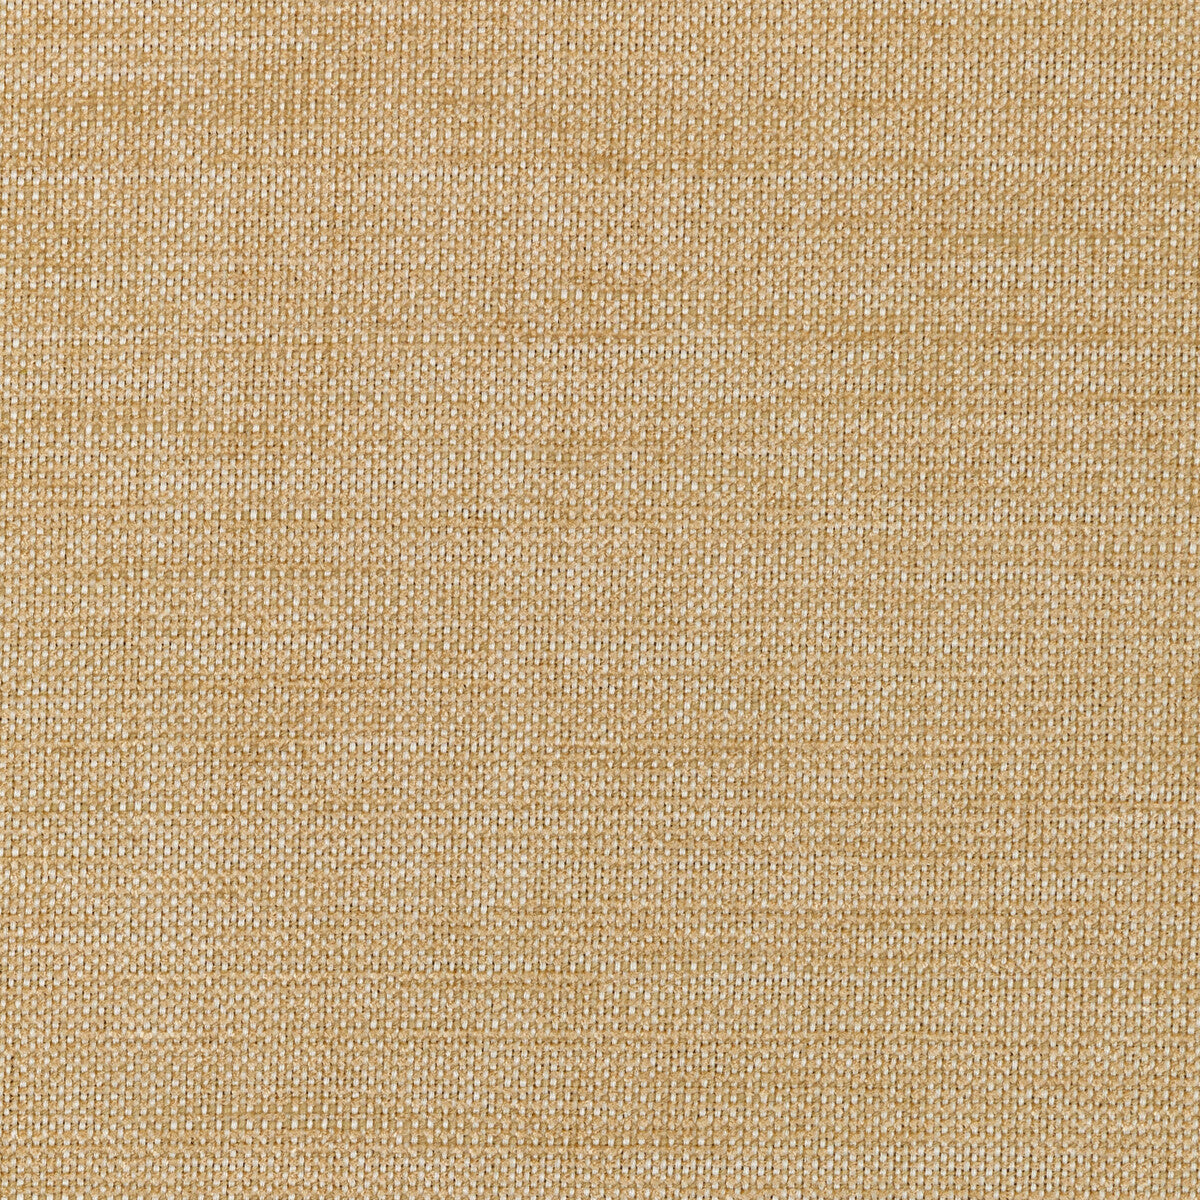 Kravet Smart fabric in 36302-16 color - pattern 36302.16.0 - by Kravet Smart in the Performance Crypton Home collection